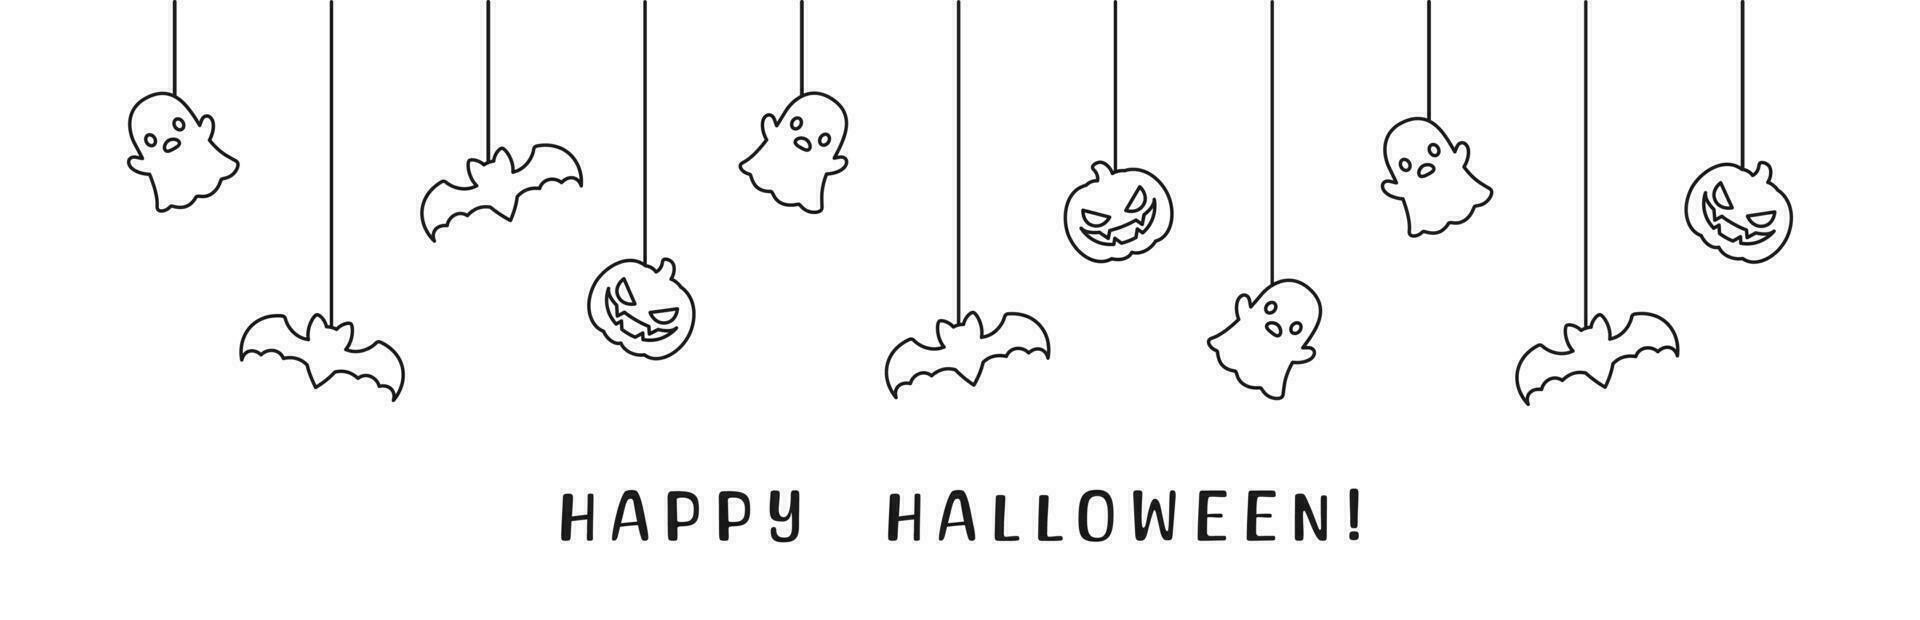 Happy Halloween banner or border with bats, ghost and jack o lantern pumpkins outline doodle. Hanging Spooky Ornaments Decoration Vector illustration, trick or treat party invitation